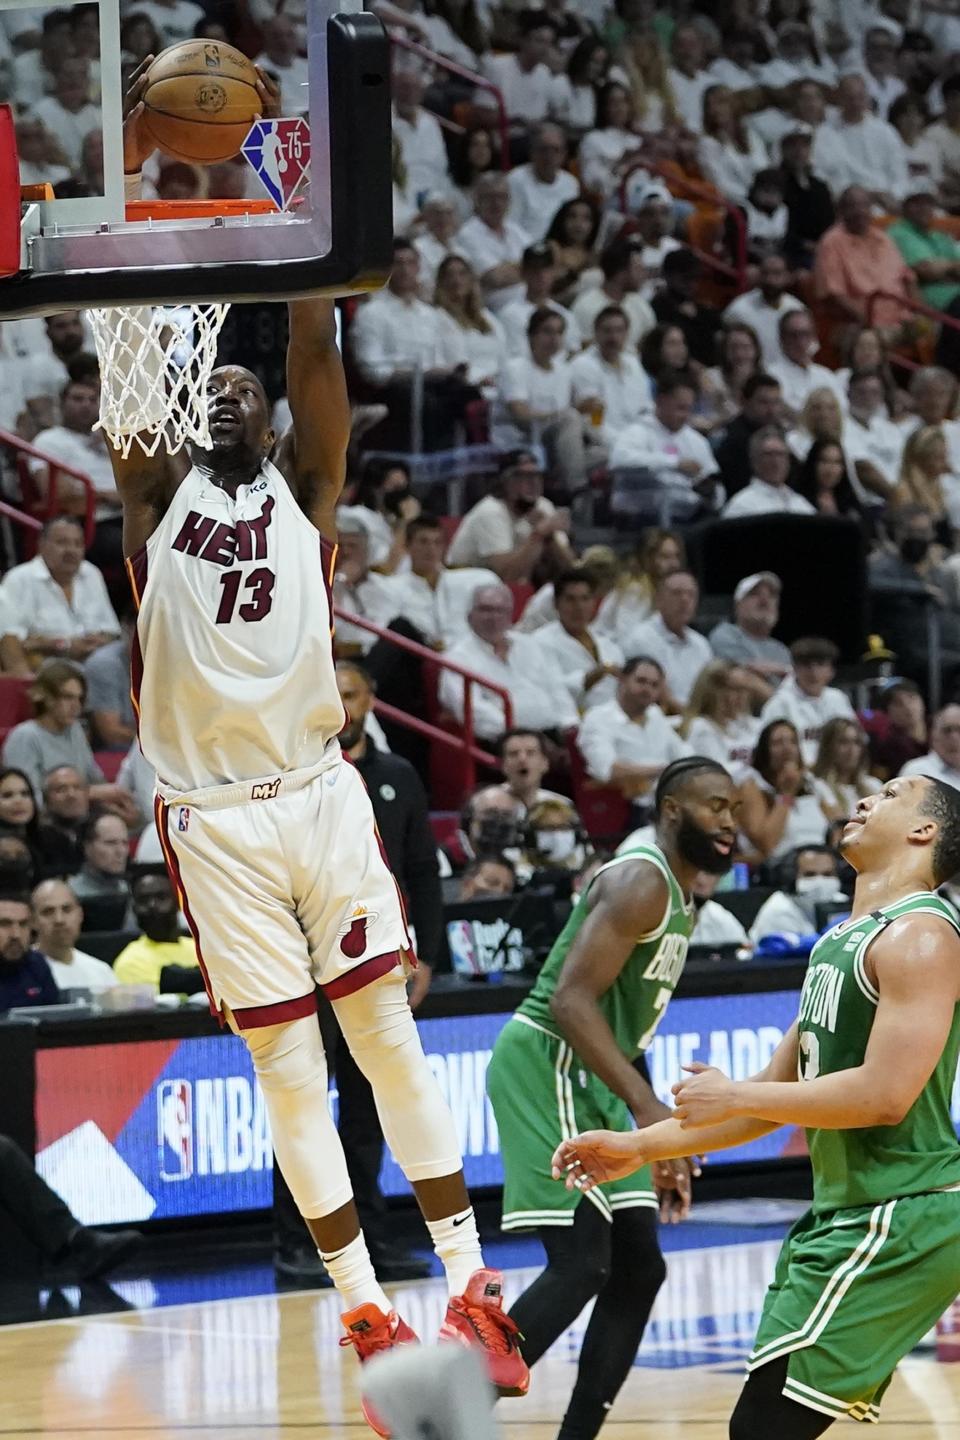 Miami Heat center Bam Adebayo (13) dunks the ball during the first half of Game 2 of the NBA basketball Eastern Conference finals playoff series against the Boston Celtics, Thursday, May 19, 2022, in Miami. (AP Photo/Lynne Sladky)